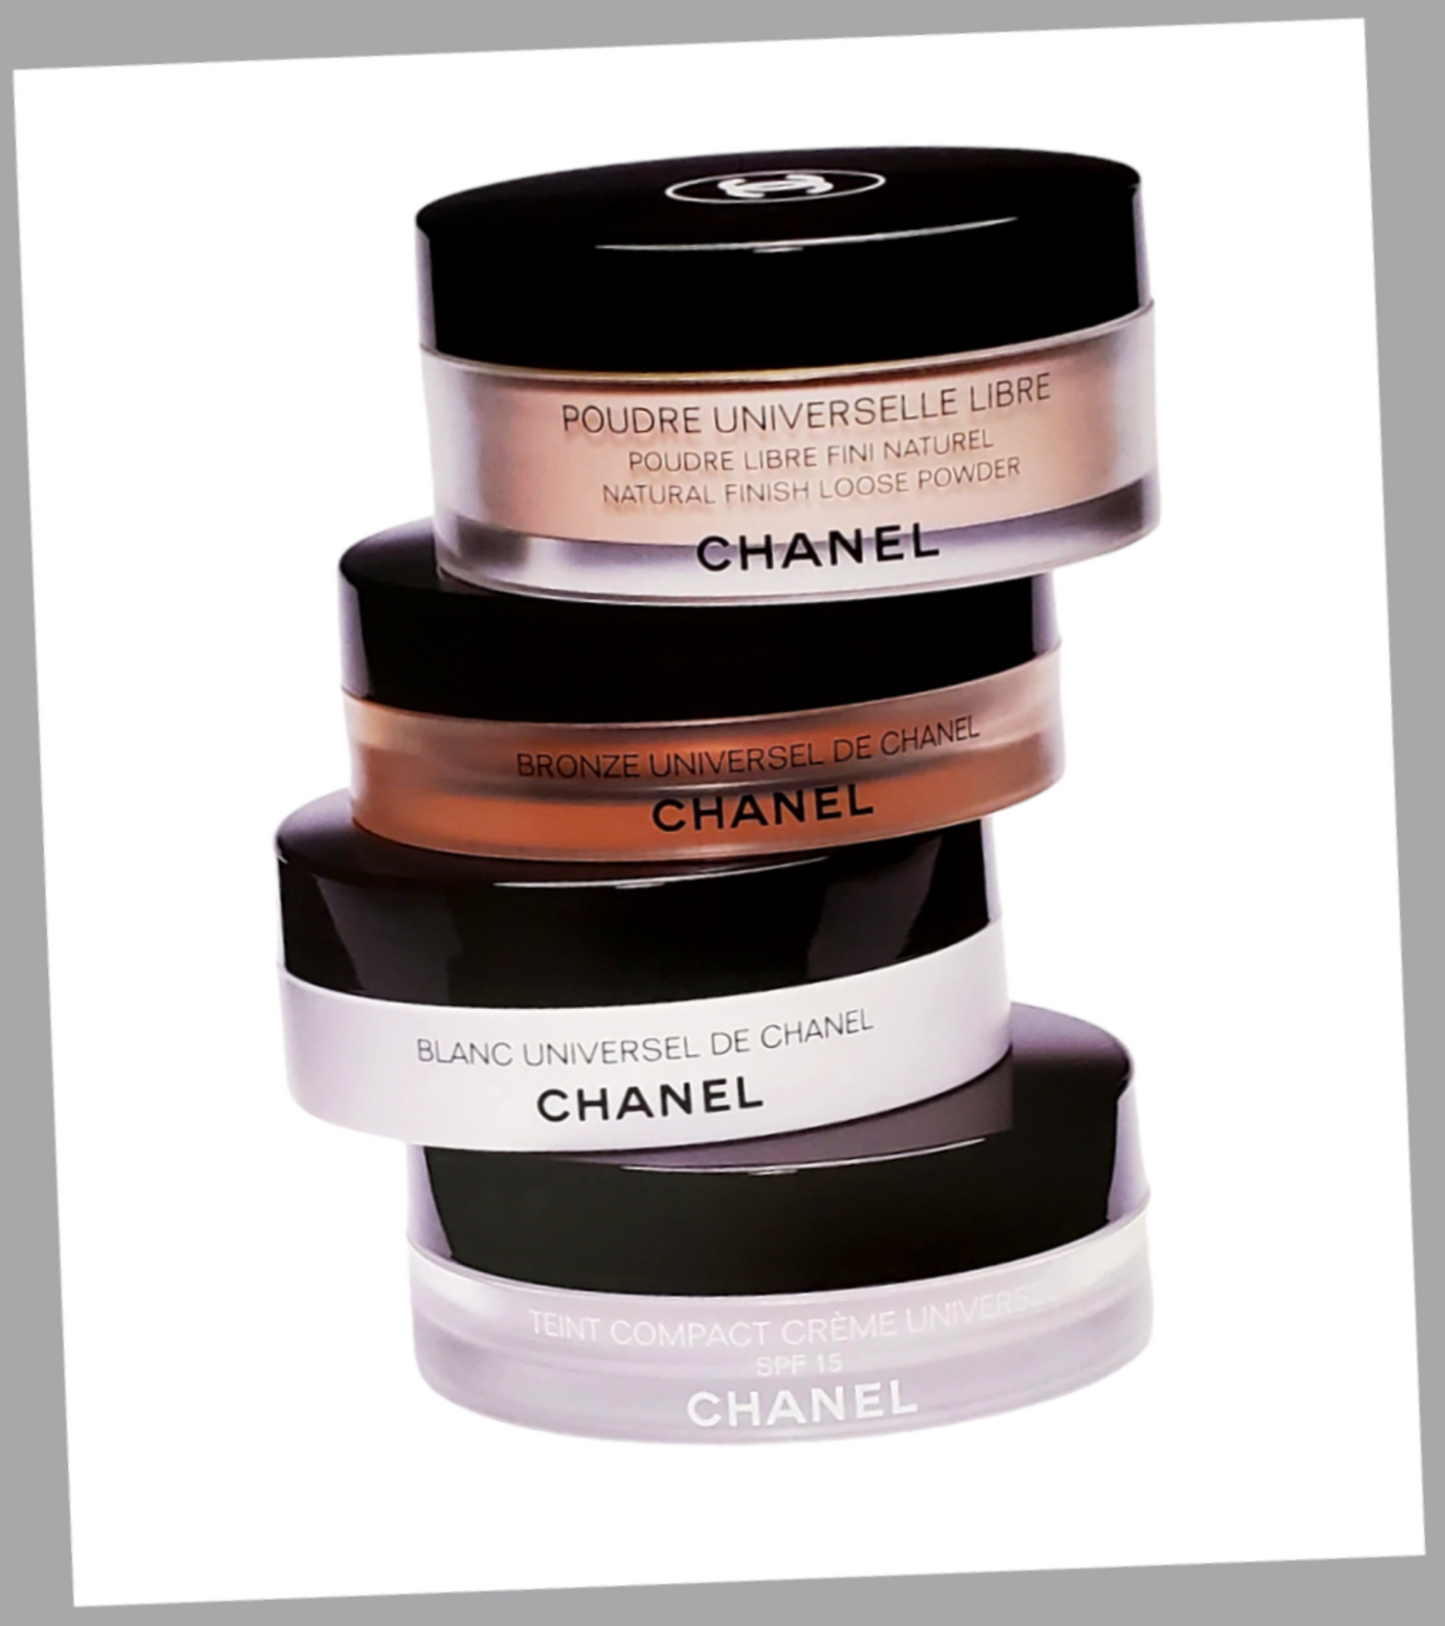 Authentic Chanel Makeup Art Print For Sale In AREA51GALLERY New Orleans 